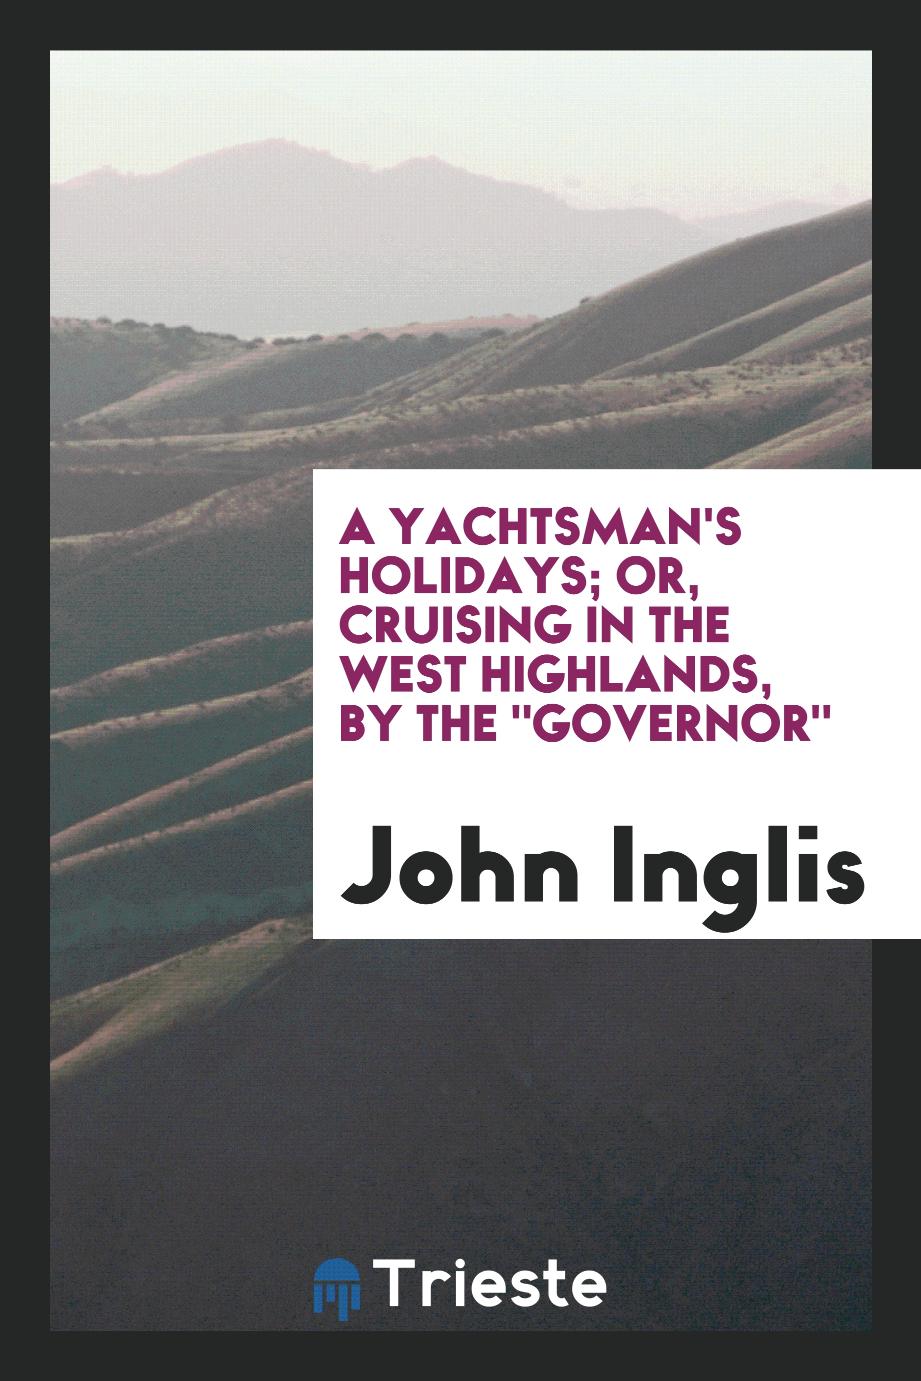 A Yachtsman's Holidays; Or, Cruising in the West Highlands, by the "Governor"